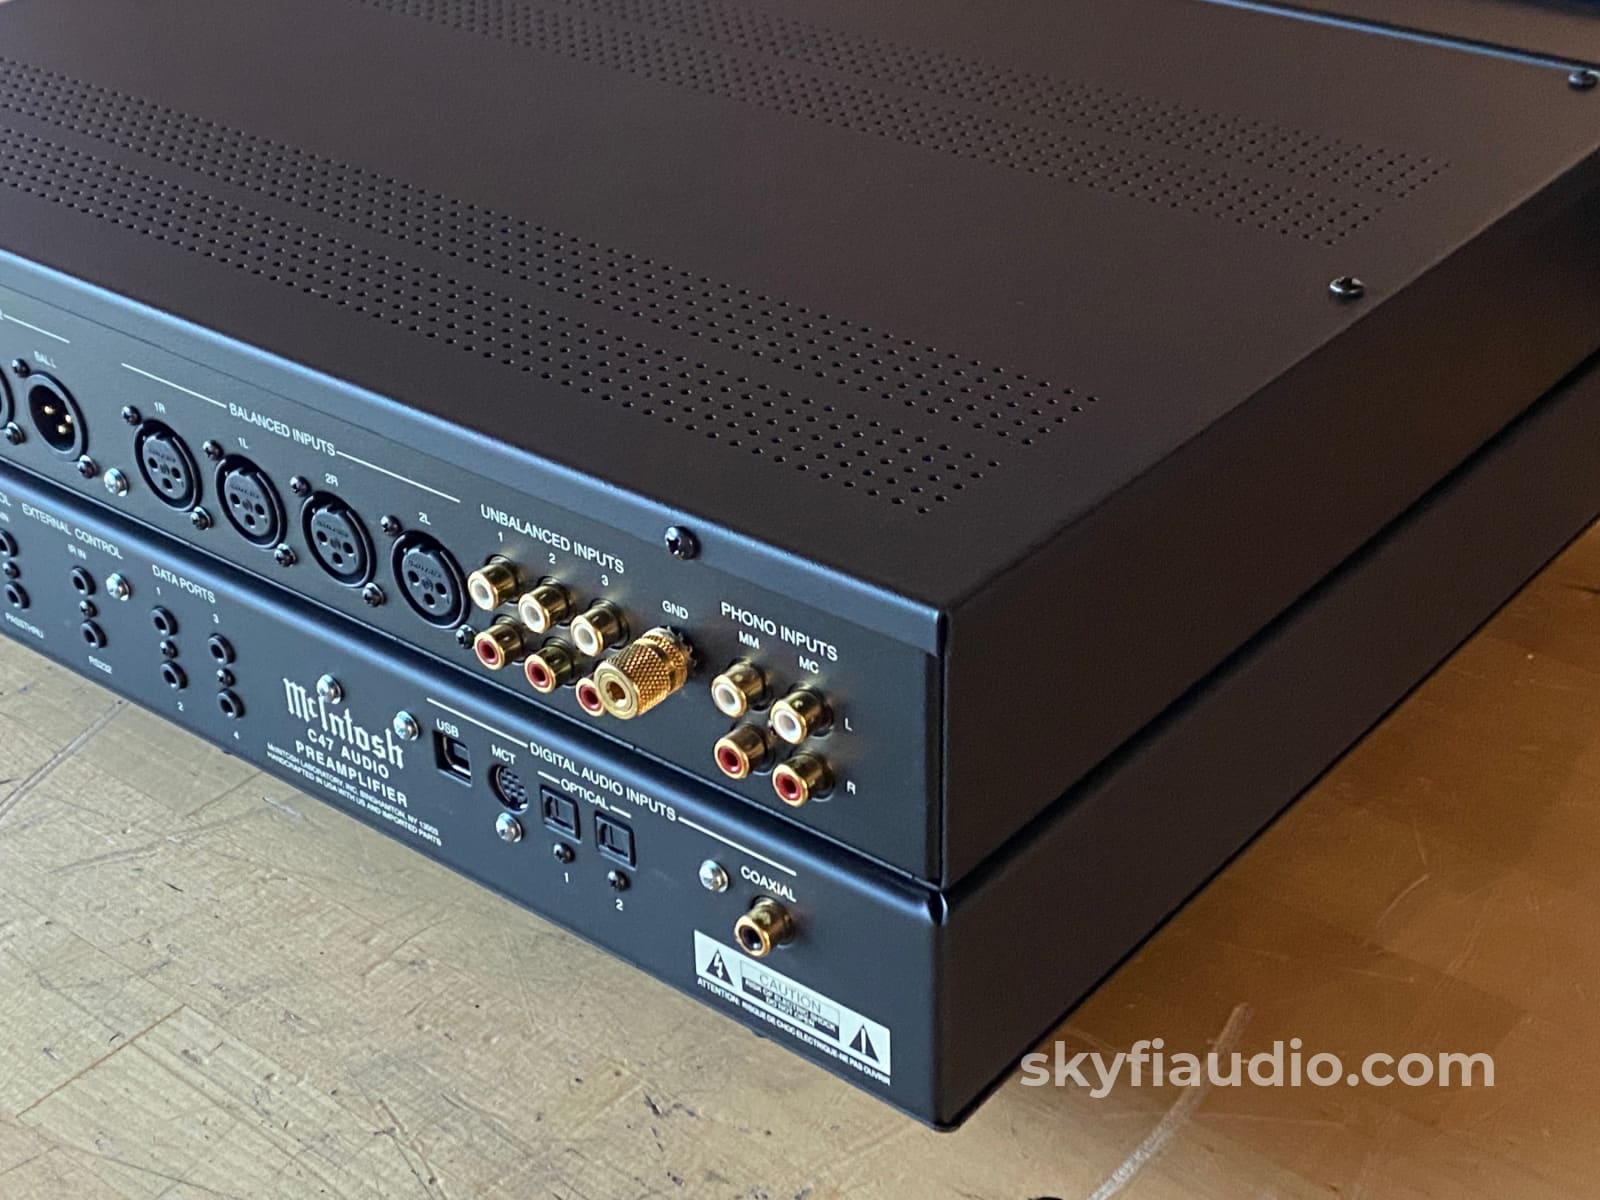 Mcintosh C47 Solid State Preamp With Built-In Dac (Hi-Res Dsd/Dxd) Preamplifier